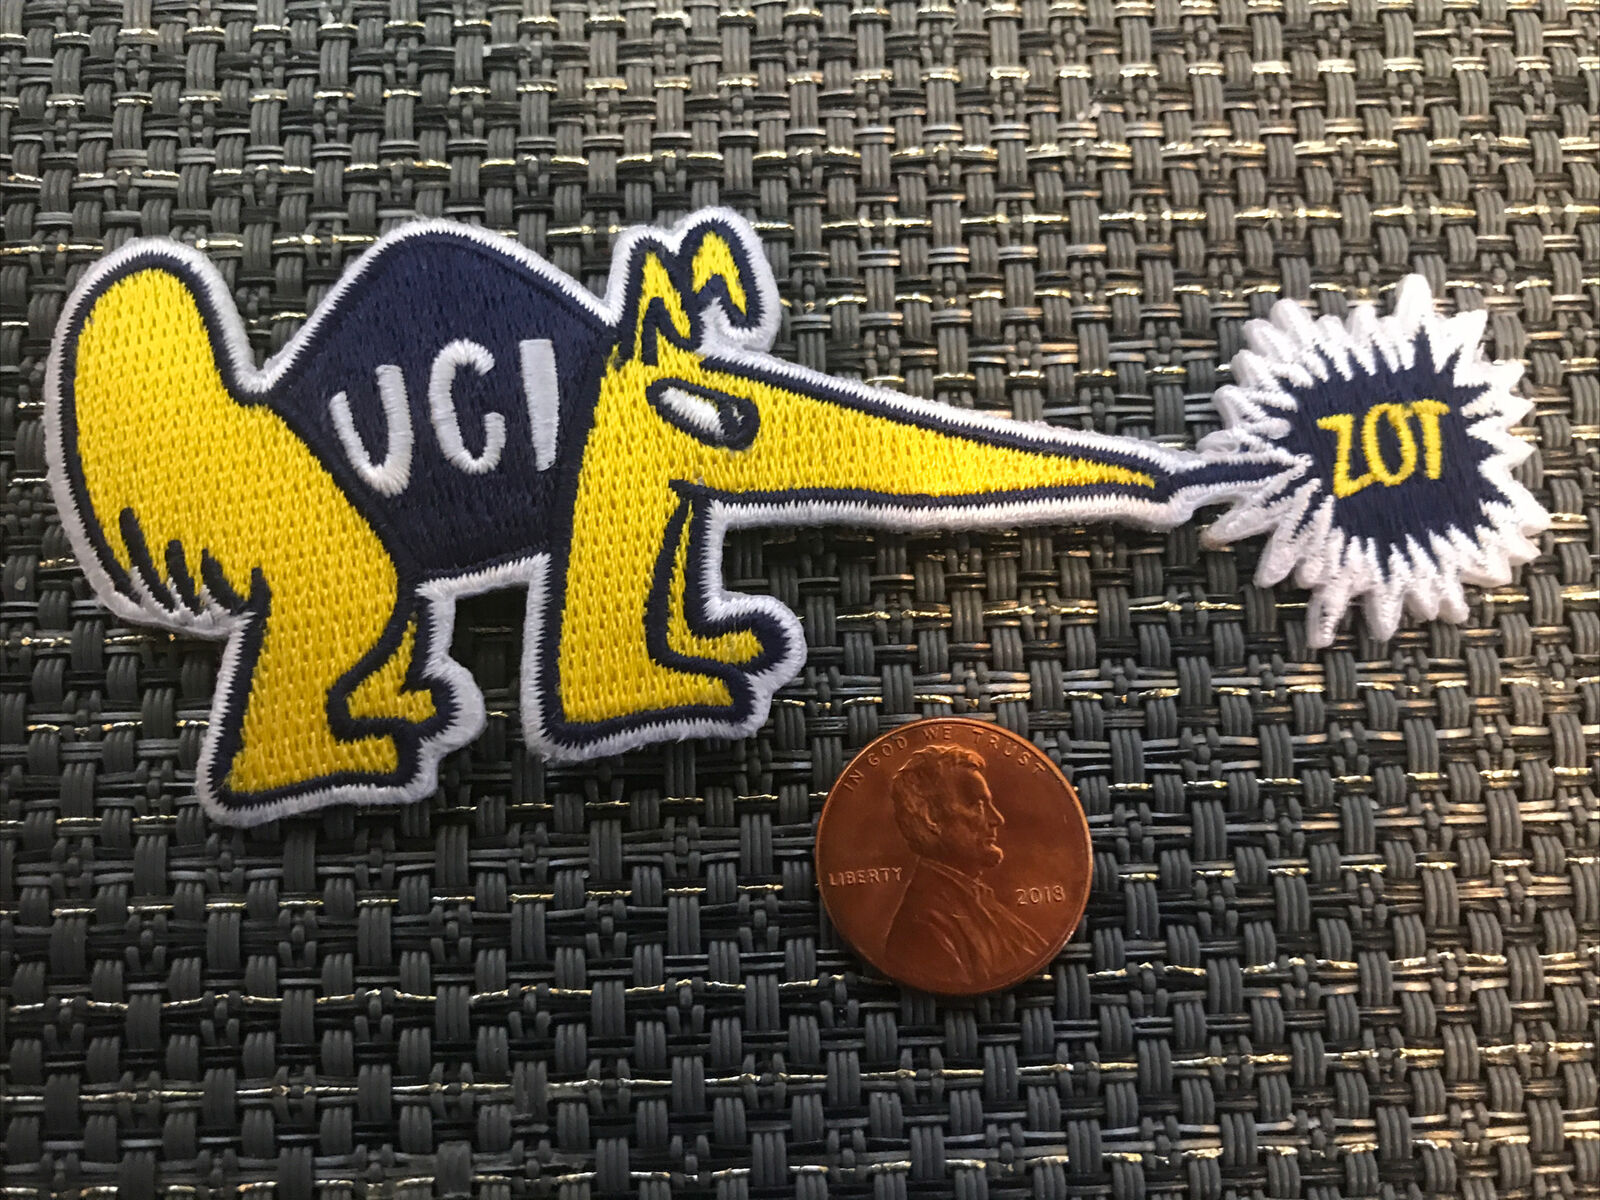 UC IRVINE ANTEATERS Vintage Embroidered Iron On Patch 4” X 1.5”